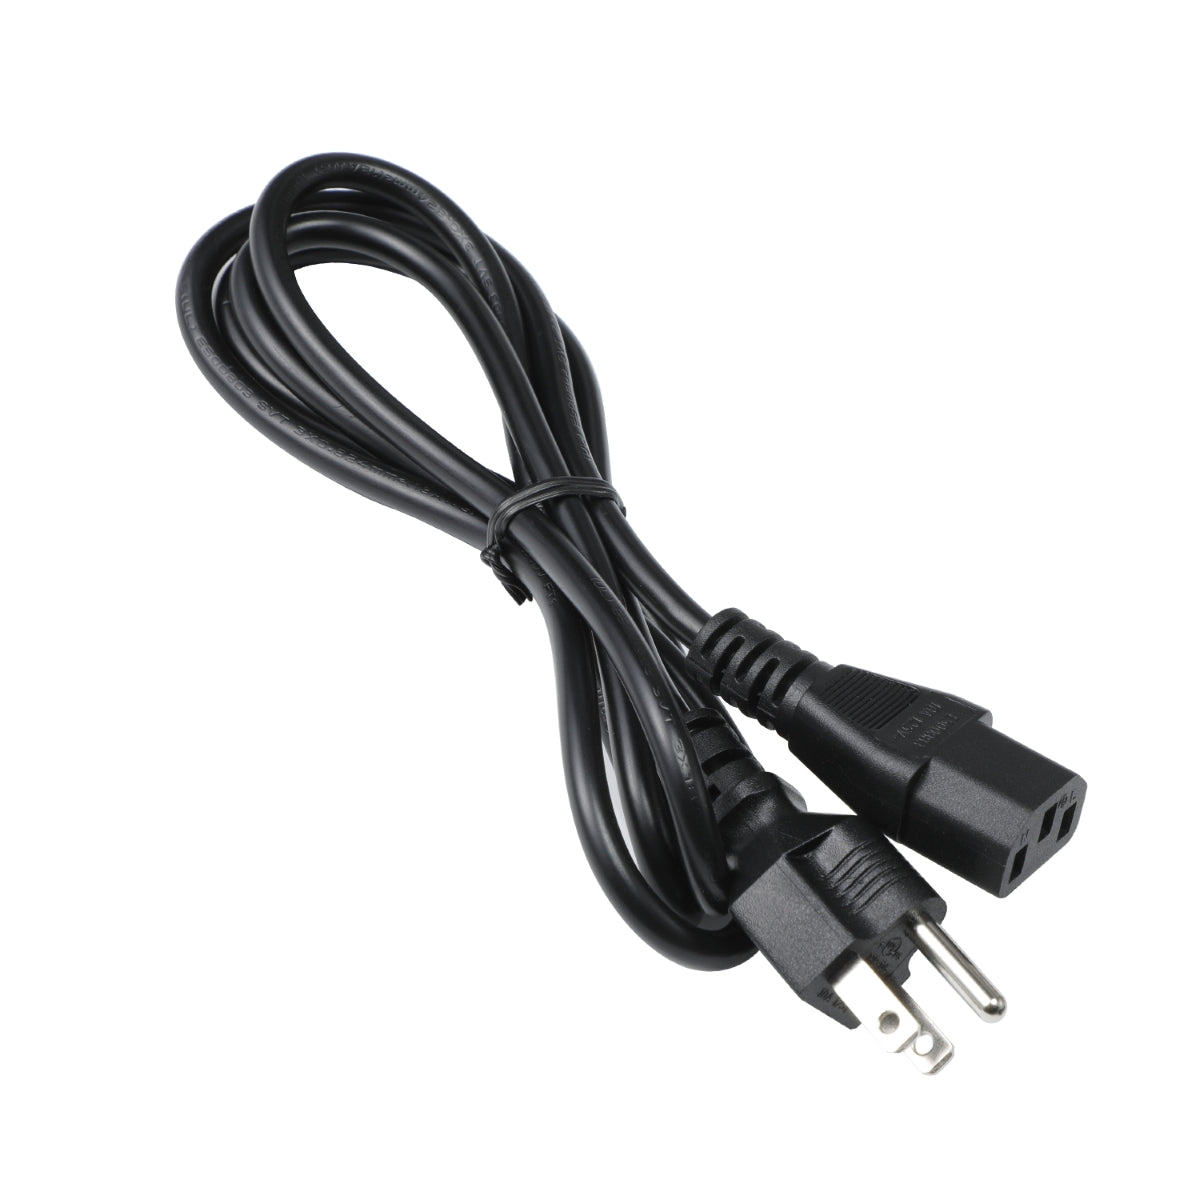 Power Cable for Philips 328B6QJEB Monitor.